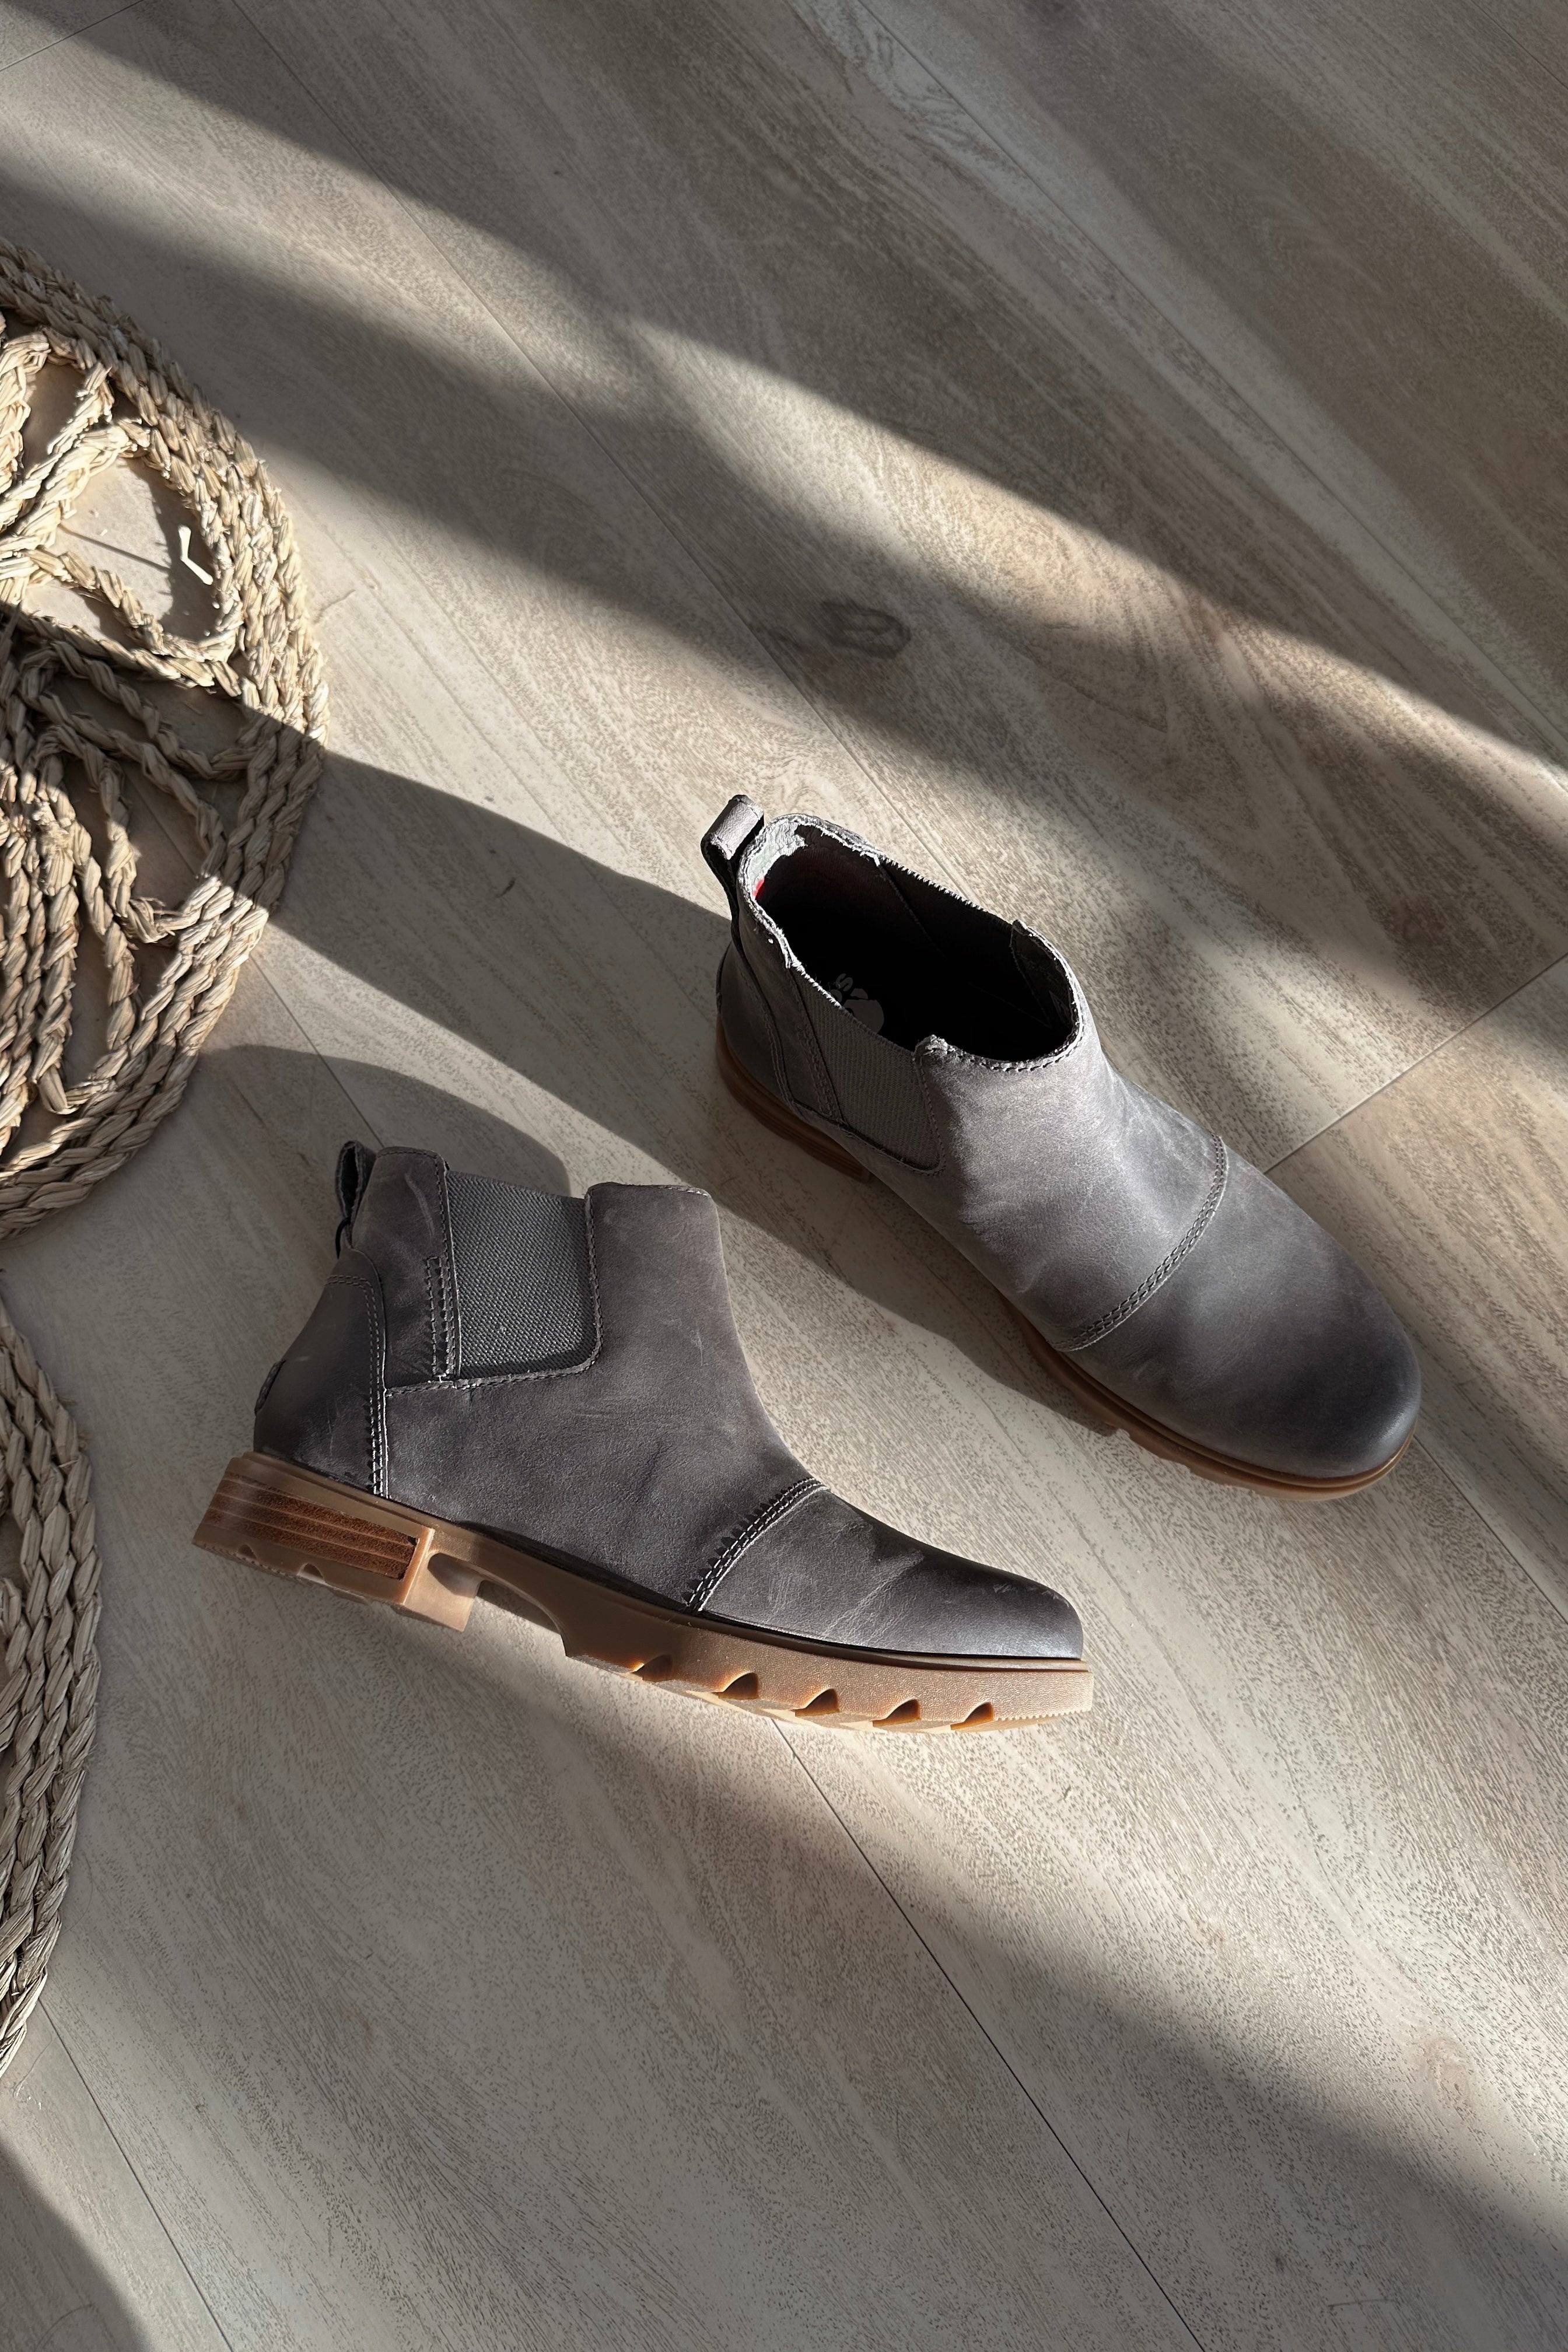 Ariel view of the Emelie III Chelsea Bootie which features grey lightweight waterproof leather upper, side stretch panels, pull tabs, ridged brown sole, 1 inch heel height and 3/4 inch platform height